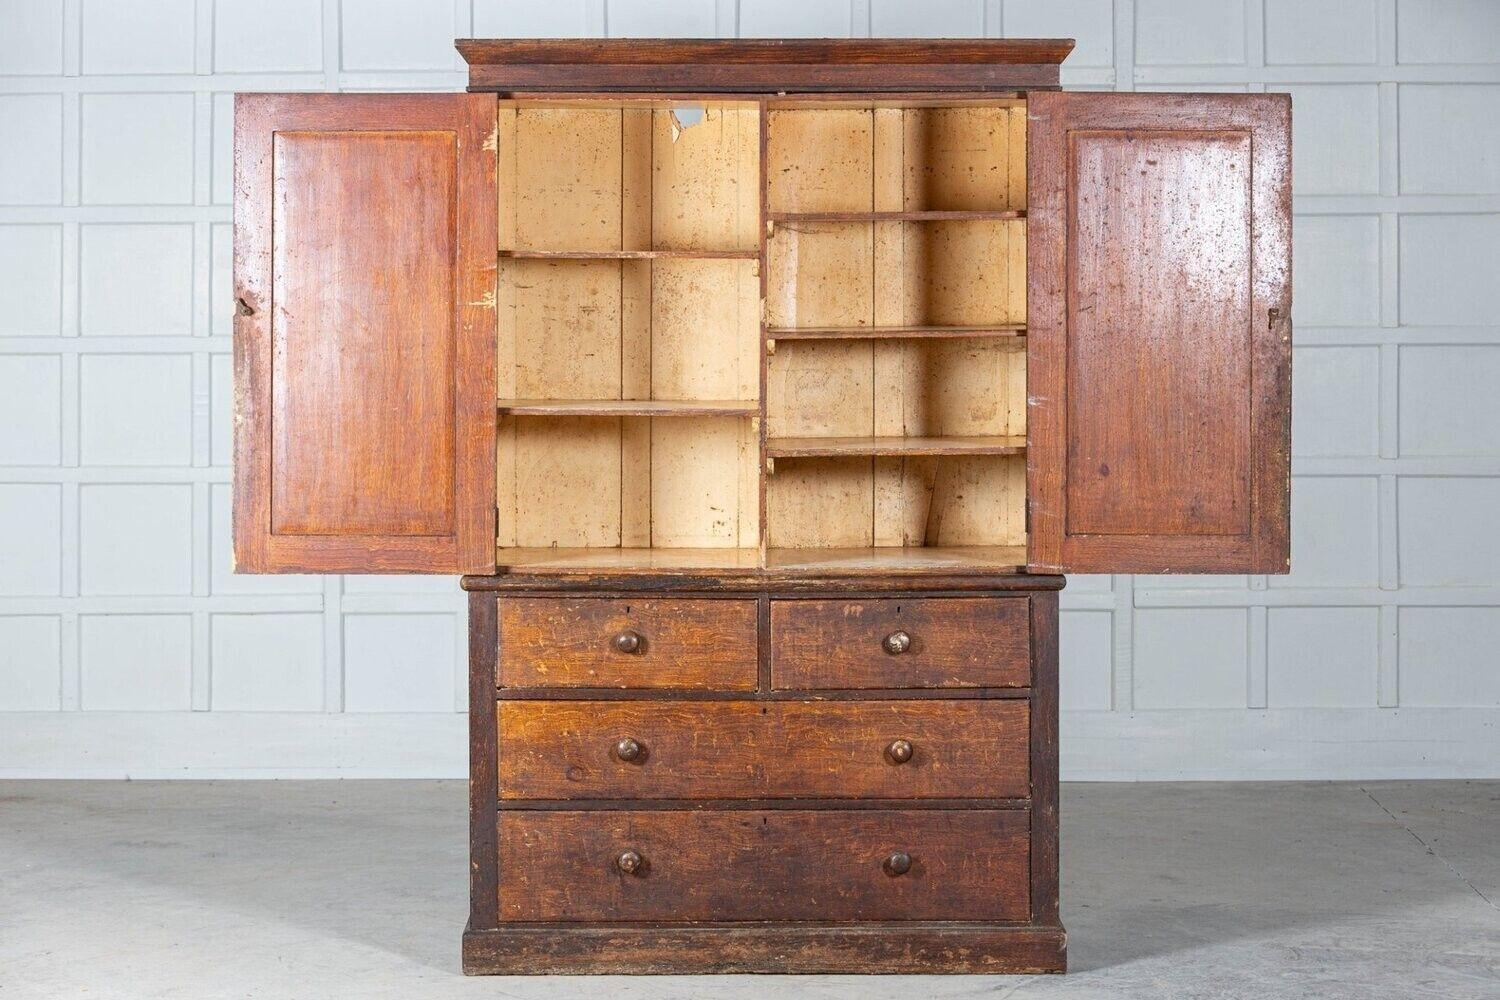 circa 1860
19th C English scrumbled pine housekeepers cupboard.
Exceptional colour
sku 1141
W138 x D 56 x H 210cm
Base W 136 x D 55 x H 90cm
Top W 138 x D 56 x H 120cm.